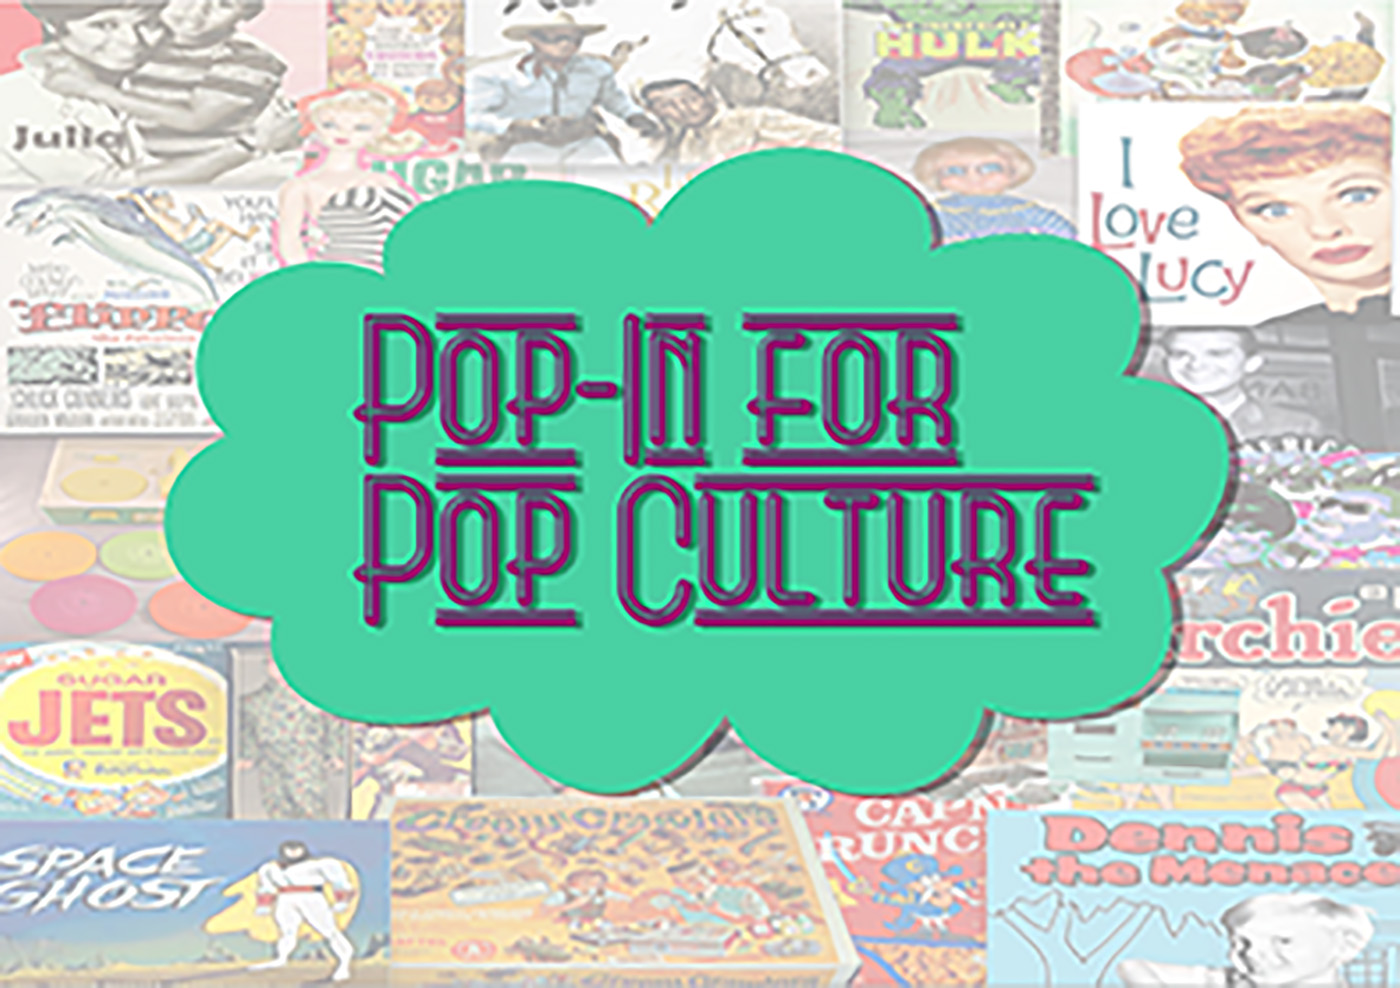 Pop-In for Pop Culture: Arts & Crafts!